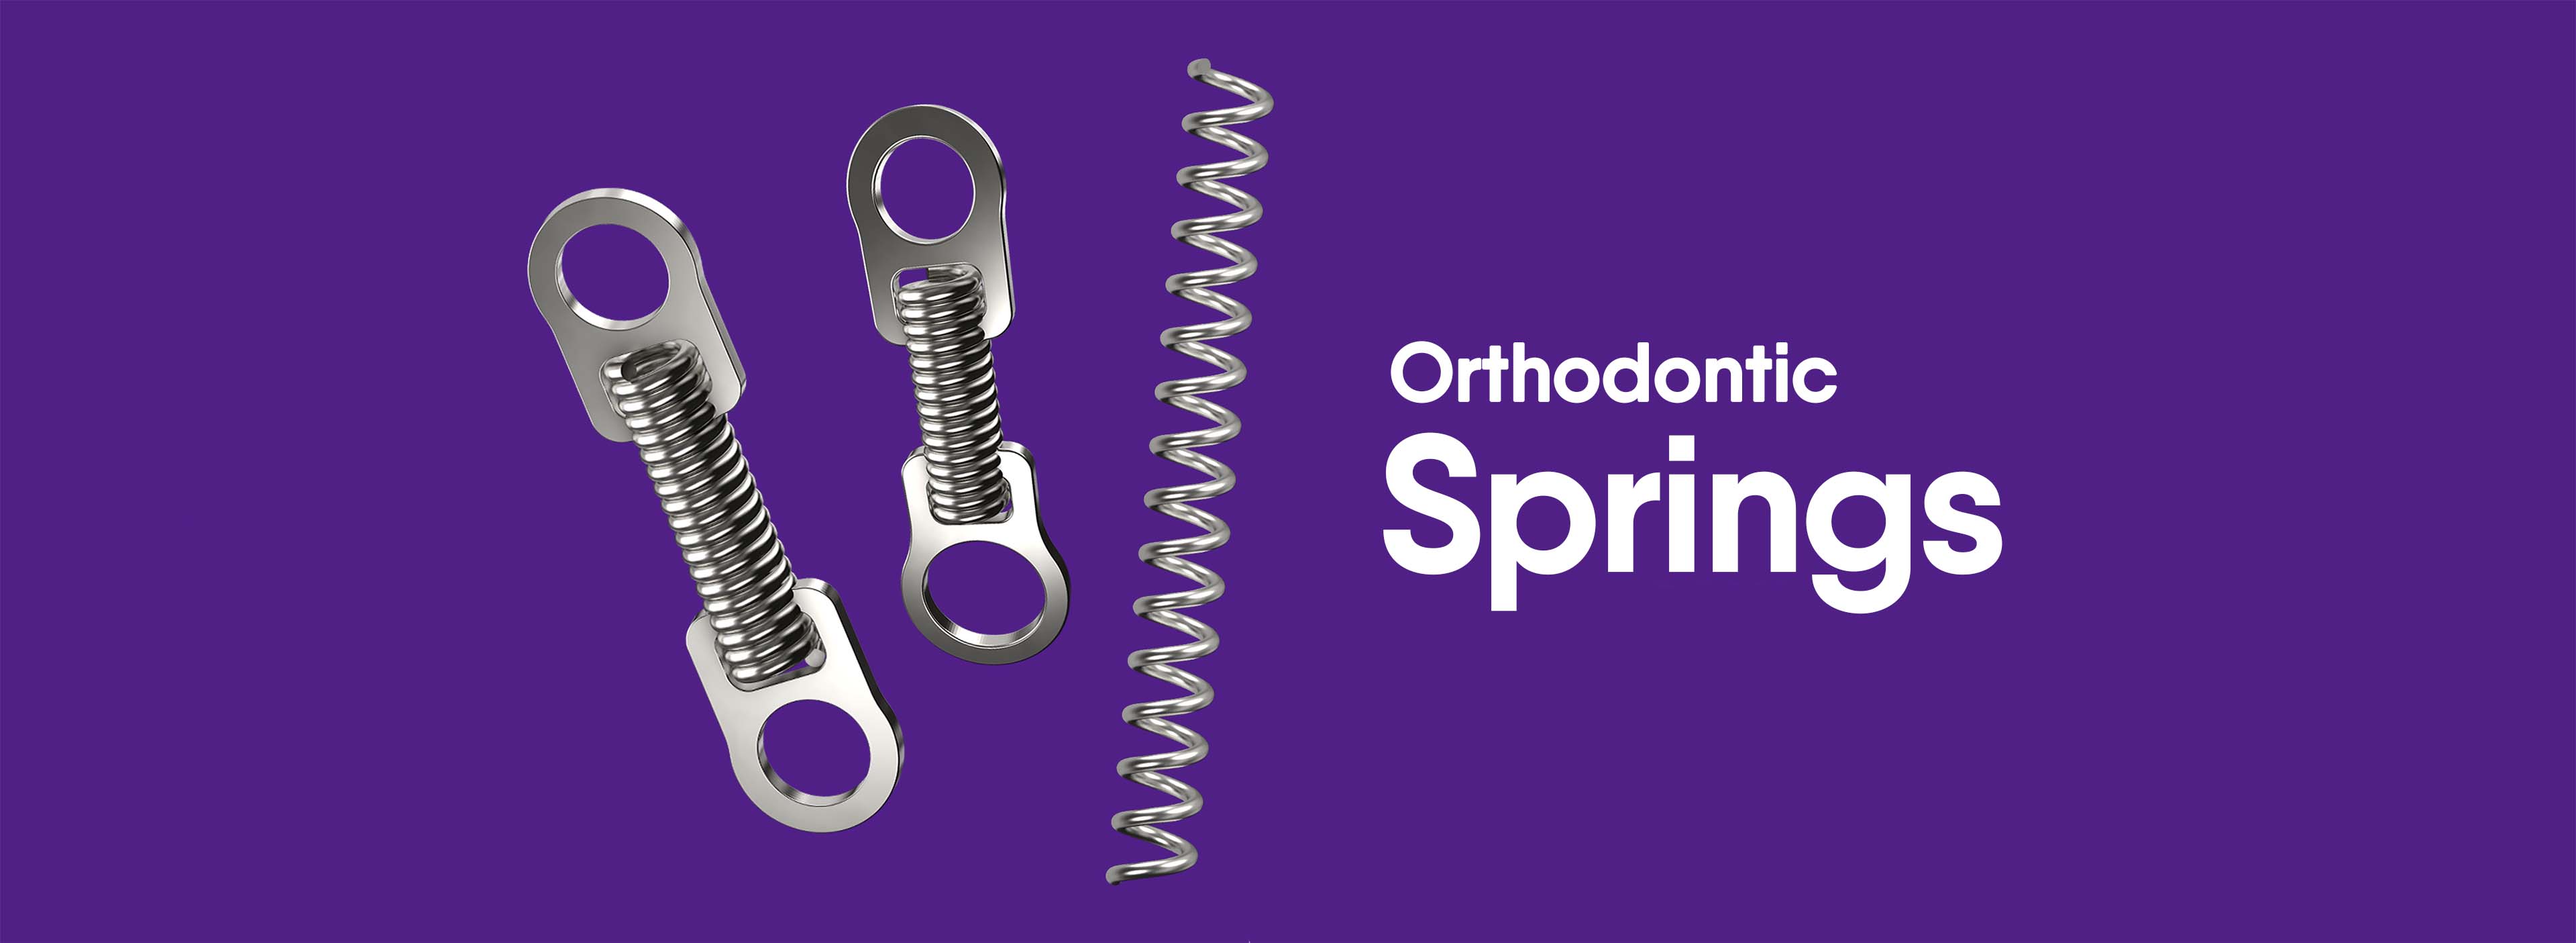 Orthometric Flexy NiTi CLOSE SPRINGS  Orthometric’s Closed Springs promote space closure with light, low intensity forces, providing the most reliable and predictable results.  These springs are ideal for mini-implants as they feature smaller retaining rings, made in the spring structure itself, preventing fracture risks.  Physical and mechanical properties: • Resilience; • Flexibility; • Biocompatibility; • Elasticity; • Outstanding memory shape; • Smooth and steady force release; • Longer activation intervals.  INDICATIONS: • Tooth retraction and space closure • Patients requiring light, controlled forces